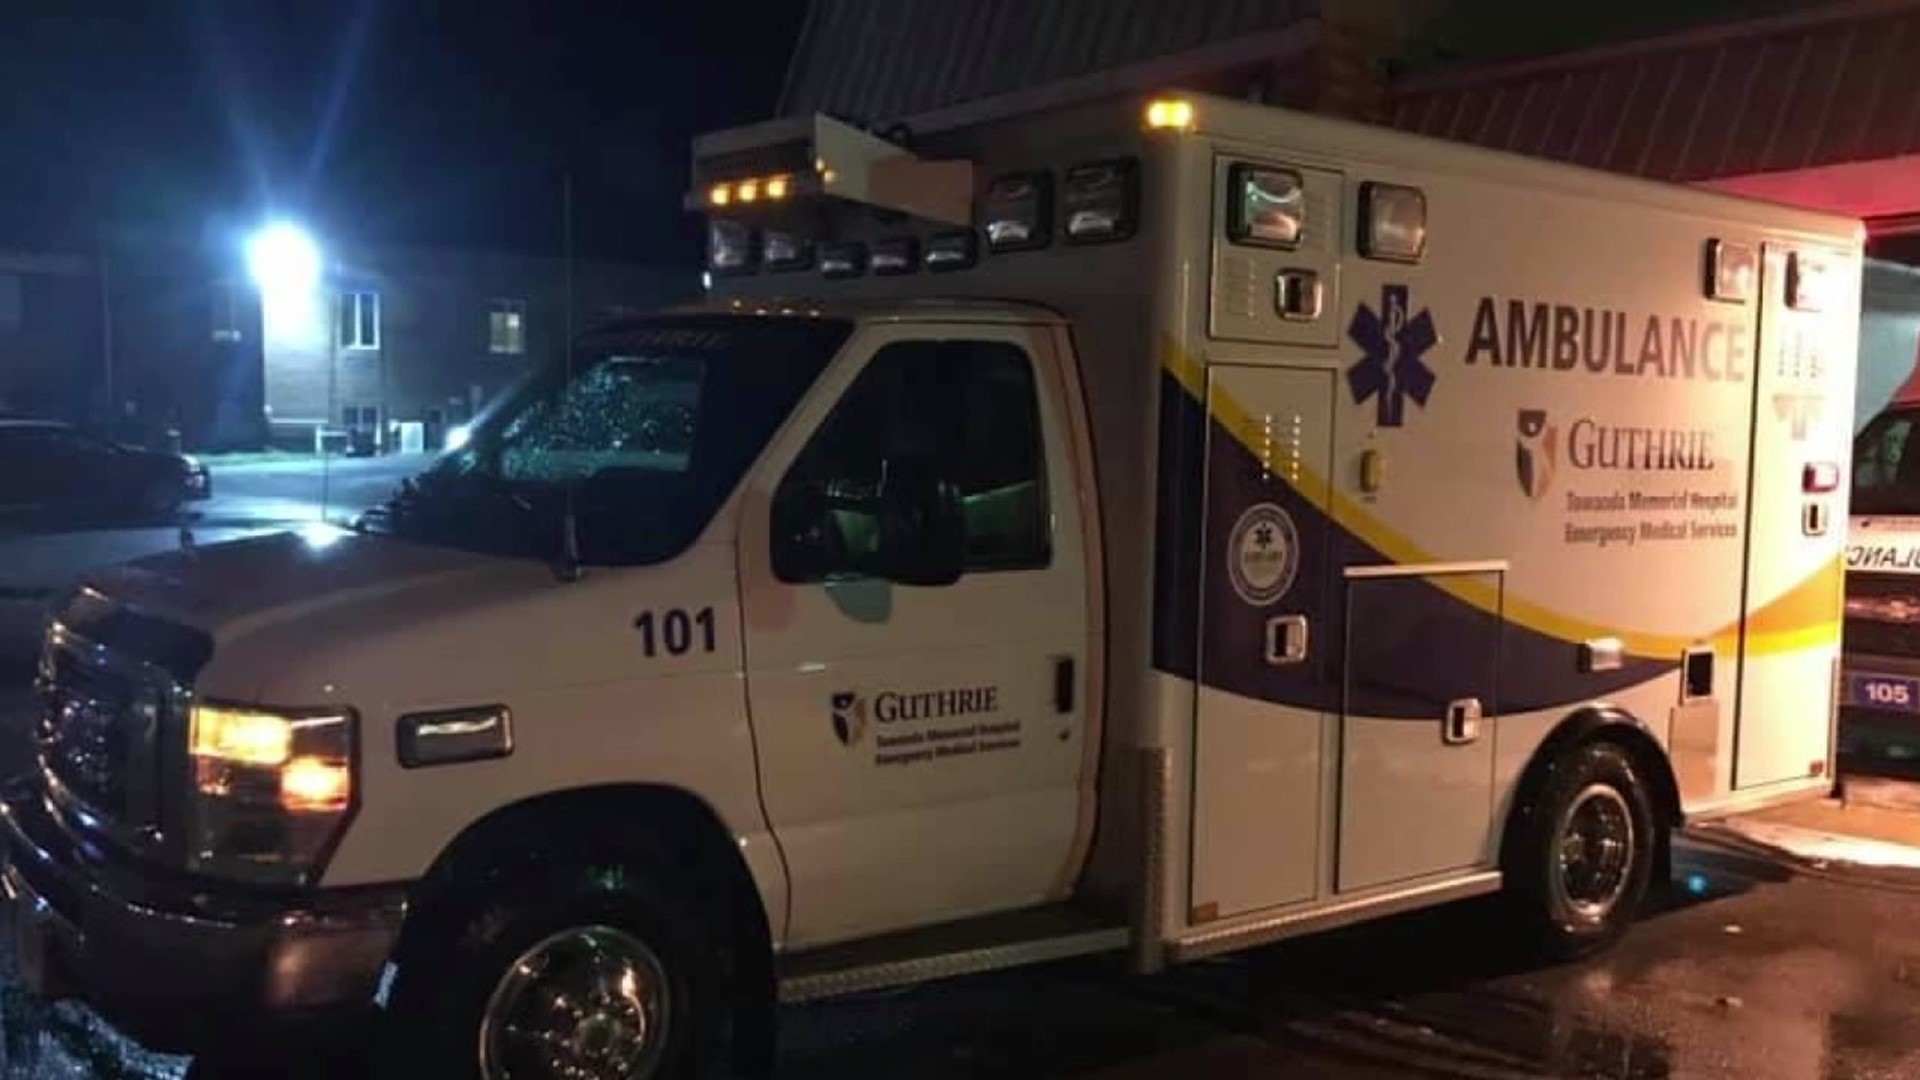 The advanced life support ambulance was parked in front of the emergency department at Robert Packer Hospital in Sayre.